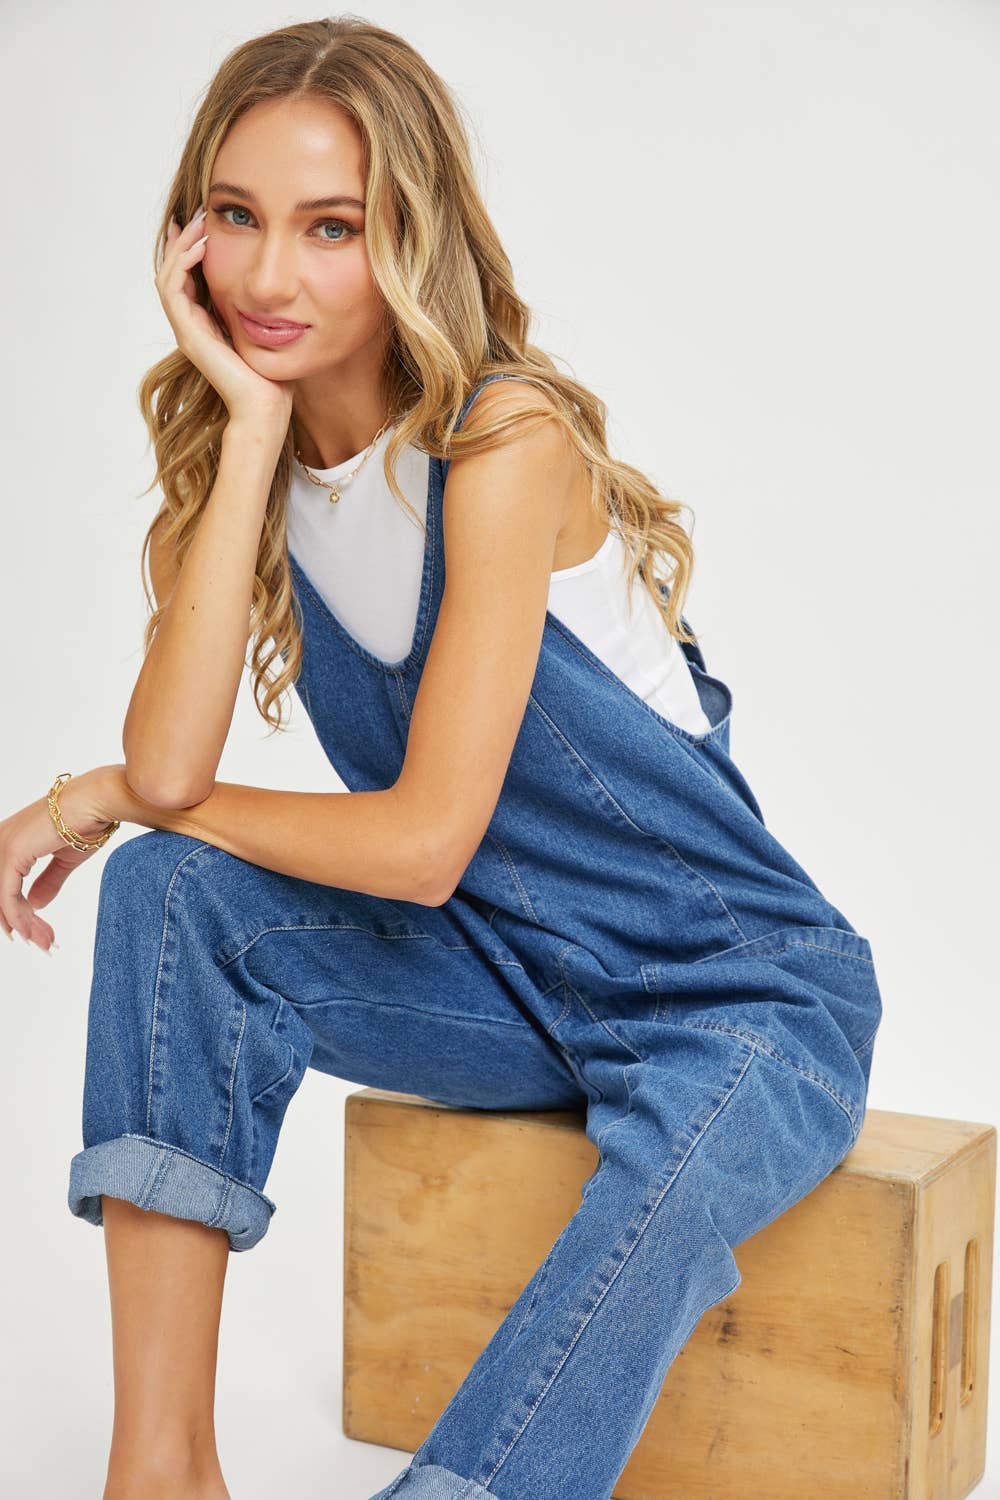 One and Done Denim Jumpsuit